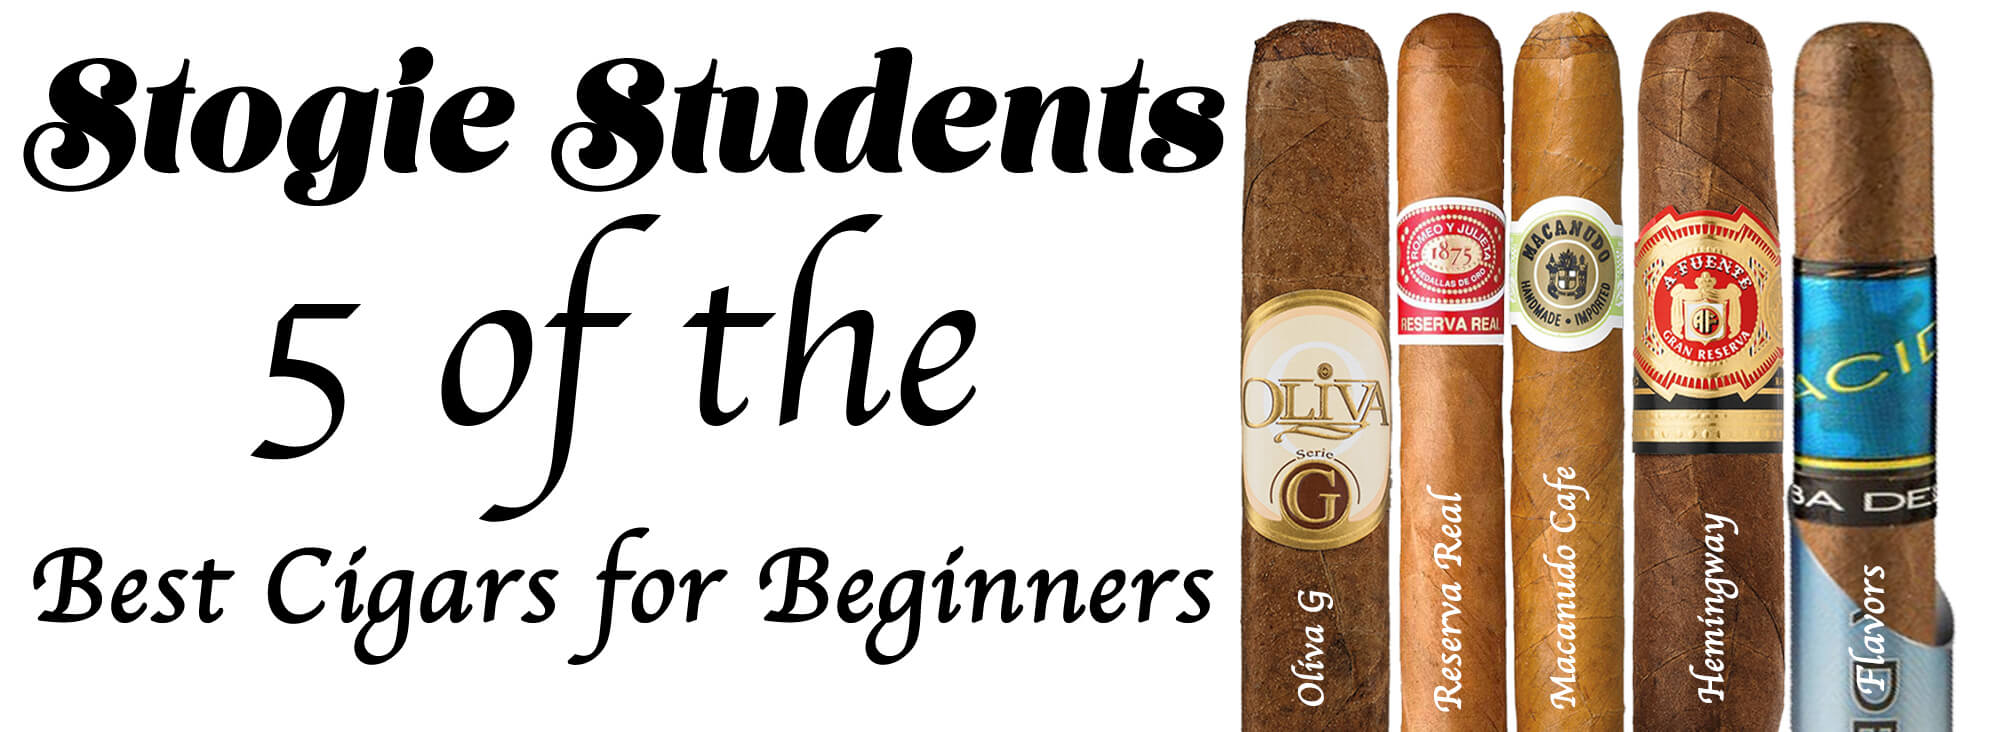 Stogie Students: 5 of the Best Cigars for Beginners